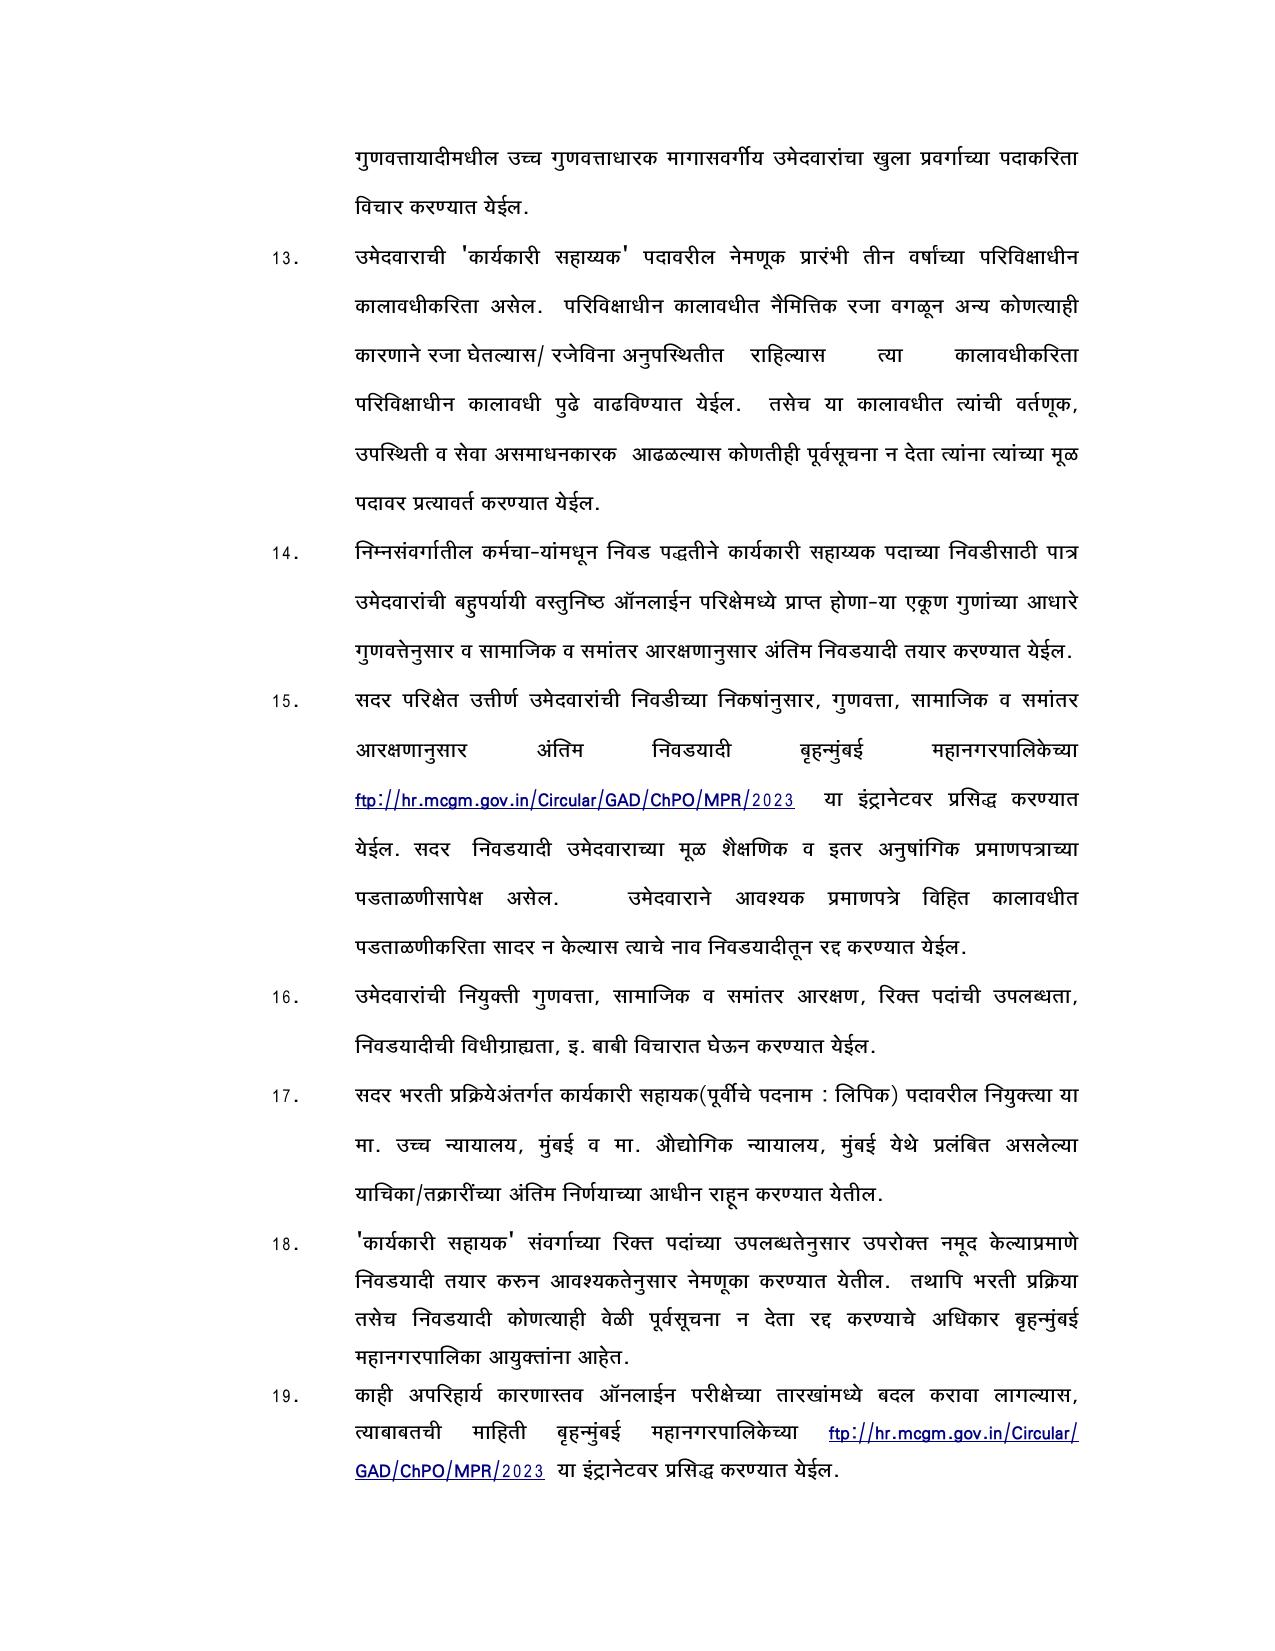 MCGM Executive Assistant Recruitment 2023 - Page 20